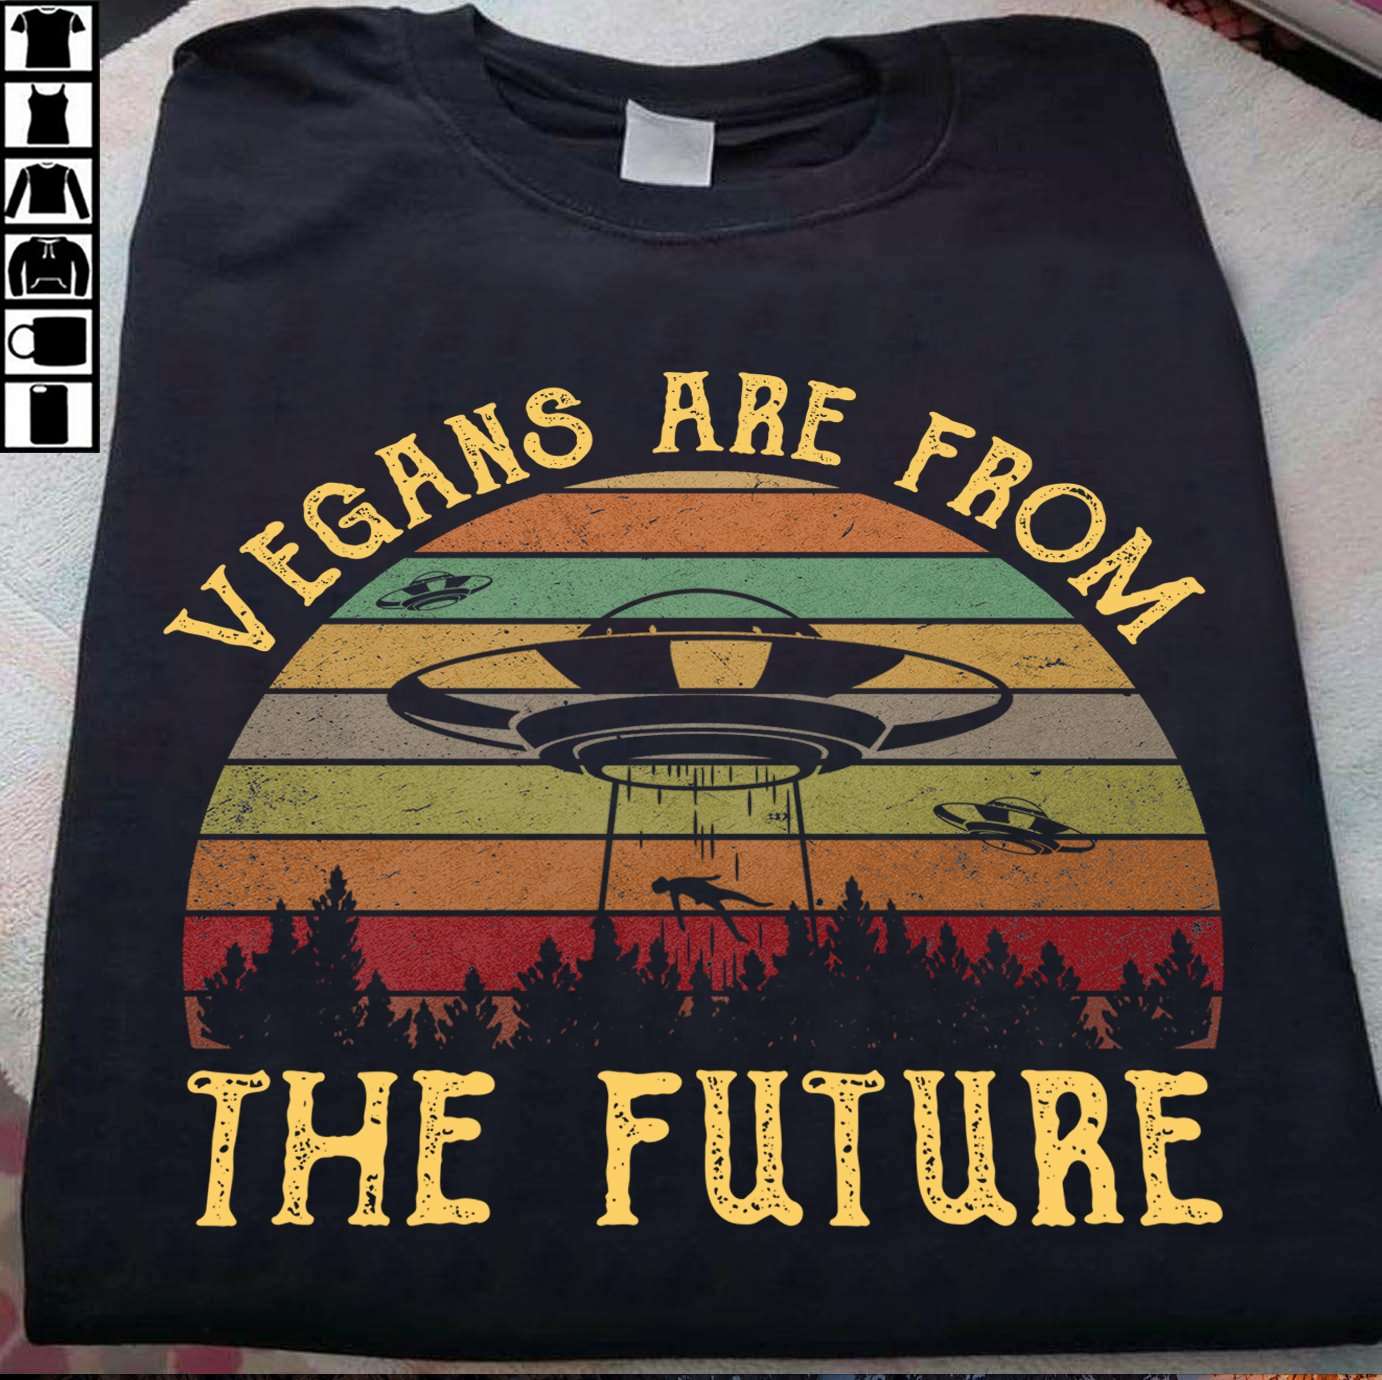 Vegans are from the future - The ufo, unidentified found object